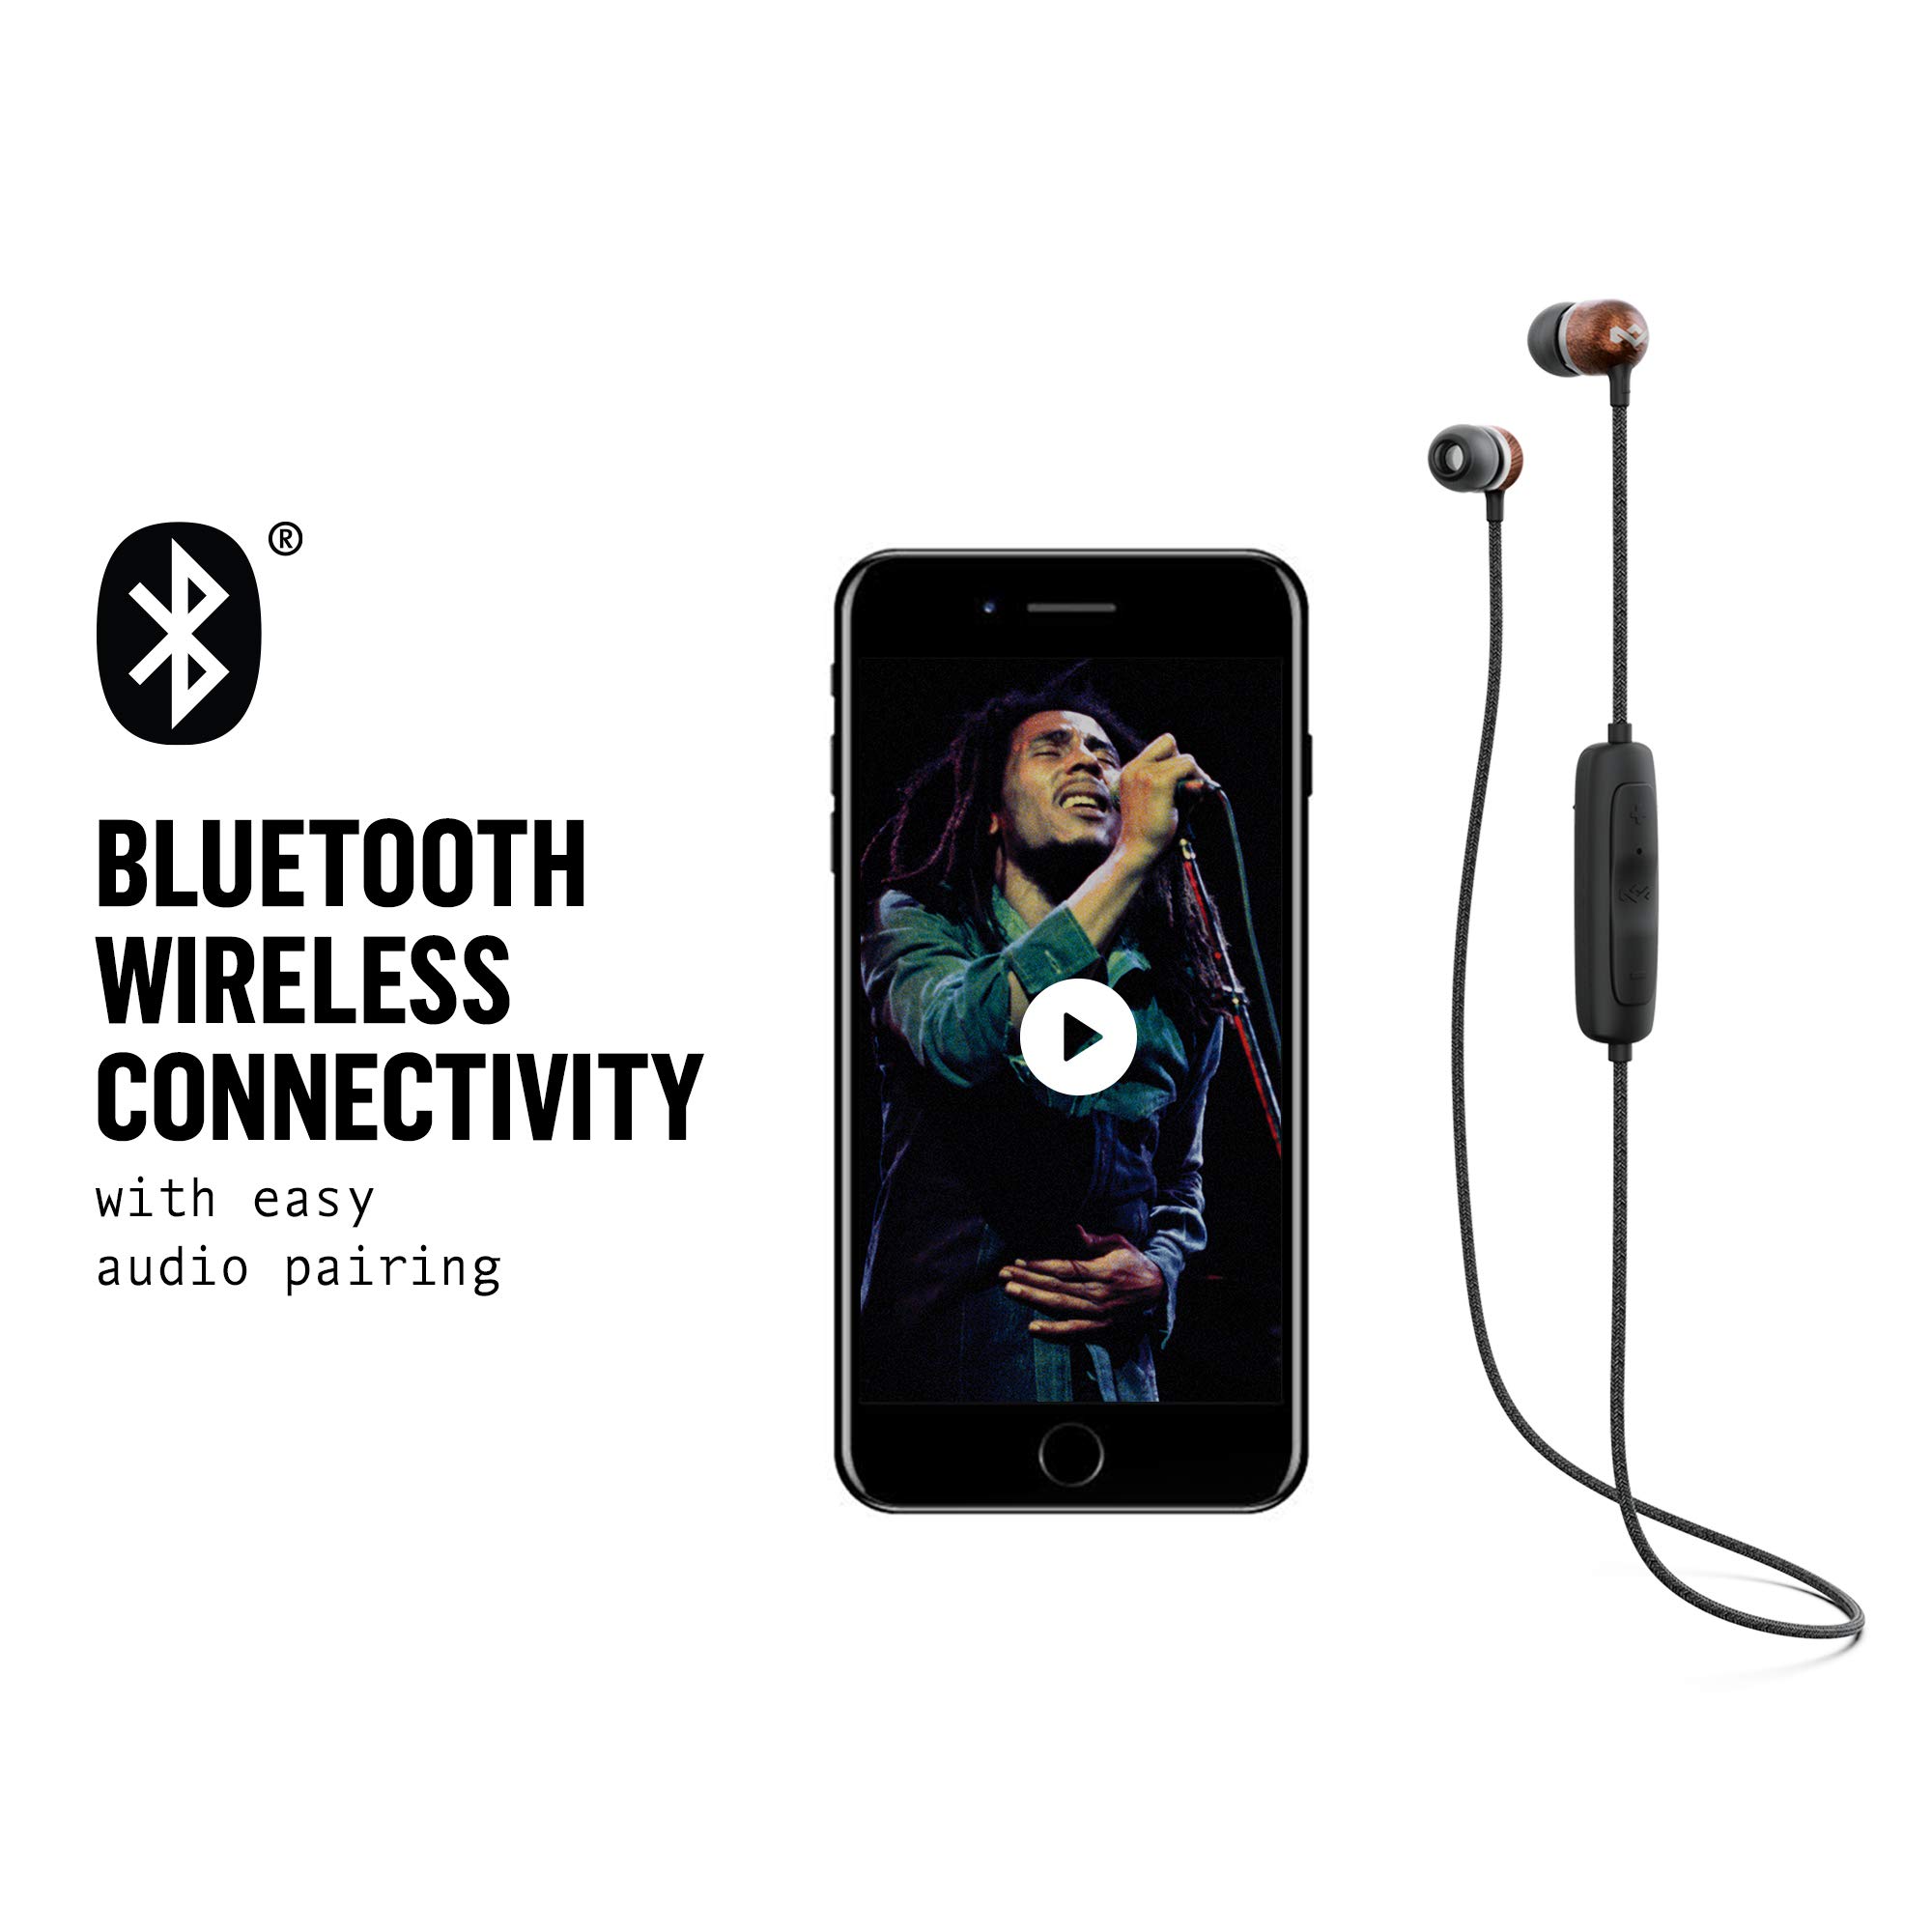 House of Marley Smile Jamaica Wireless 2, Bluetooth Headphones, Long Battery Life, Built-in Microphone and Quick Charge Technology, Signature Black